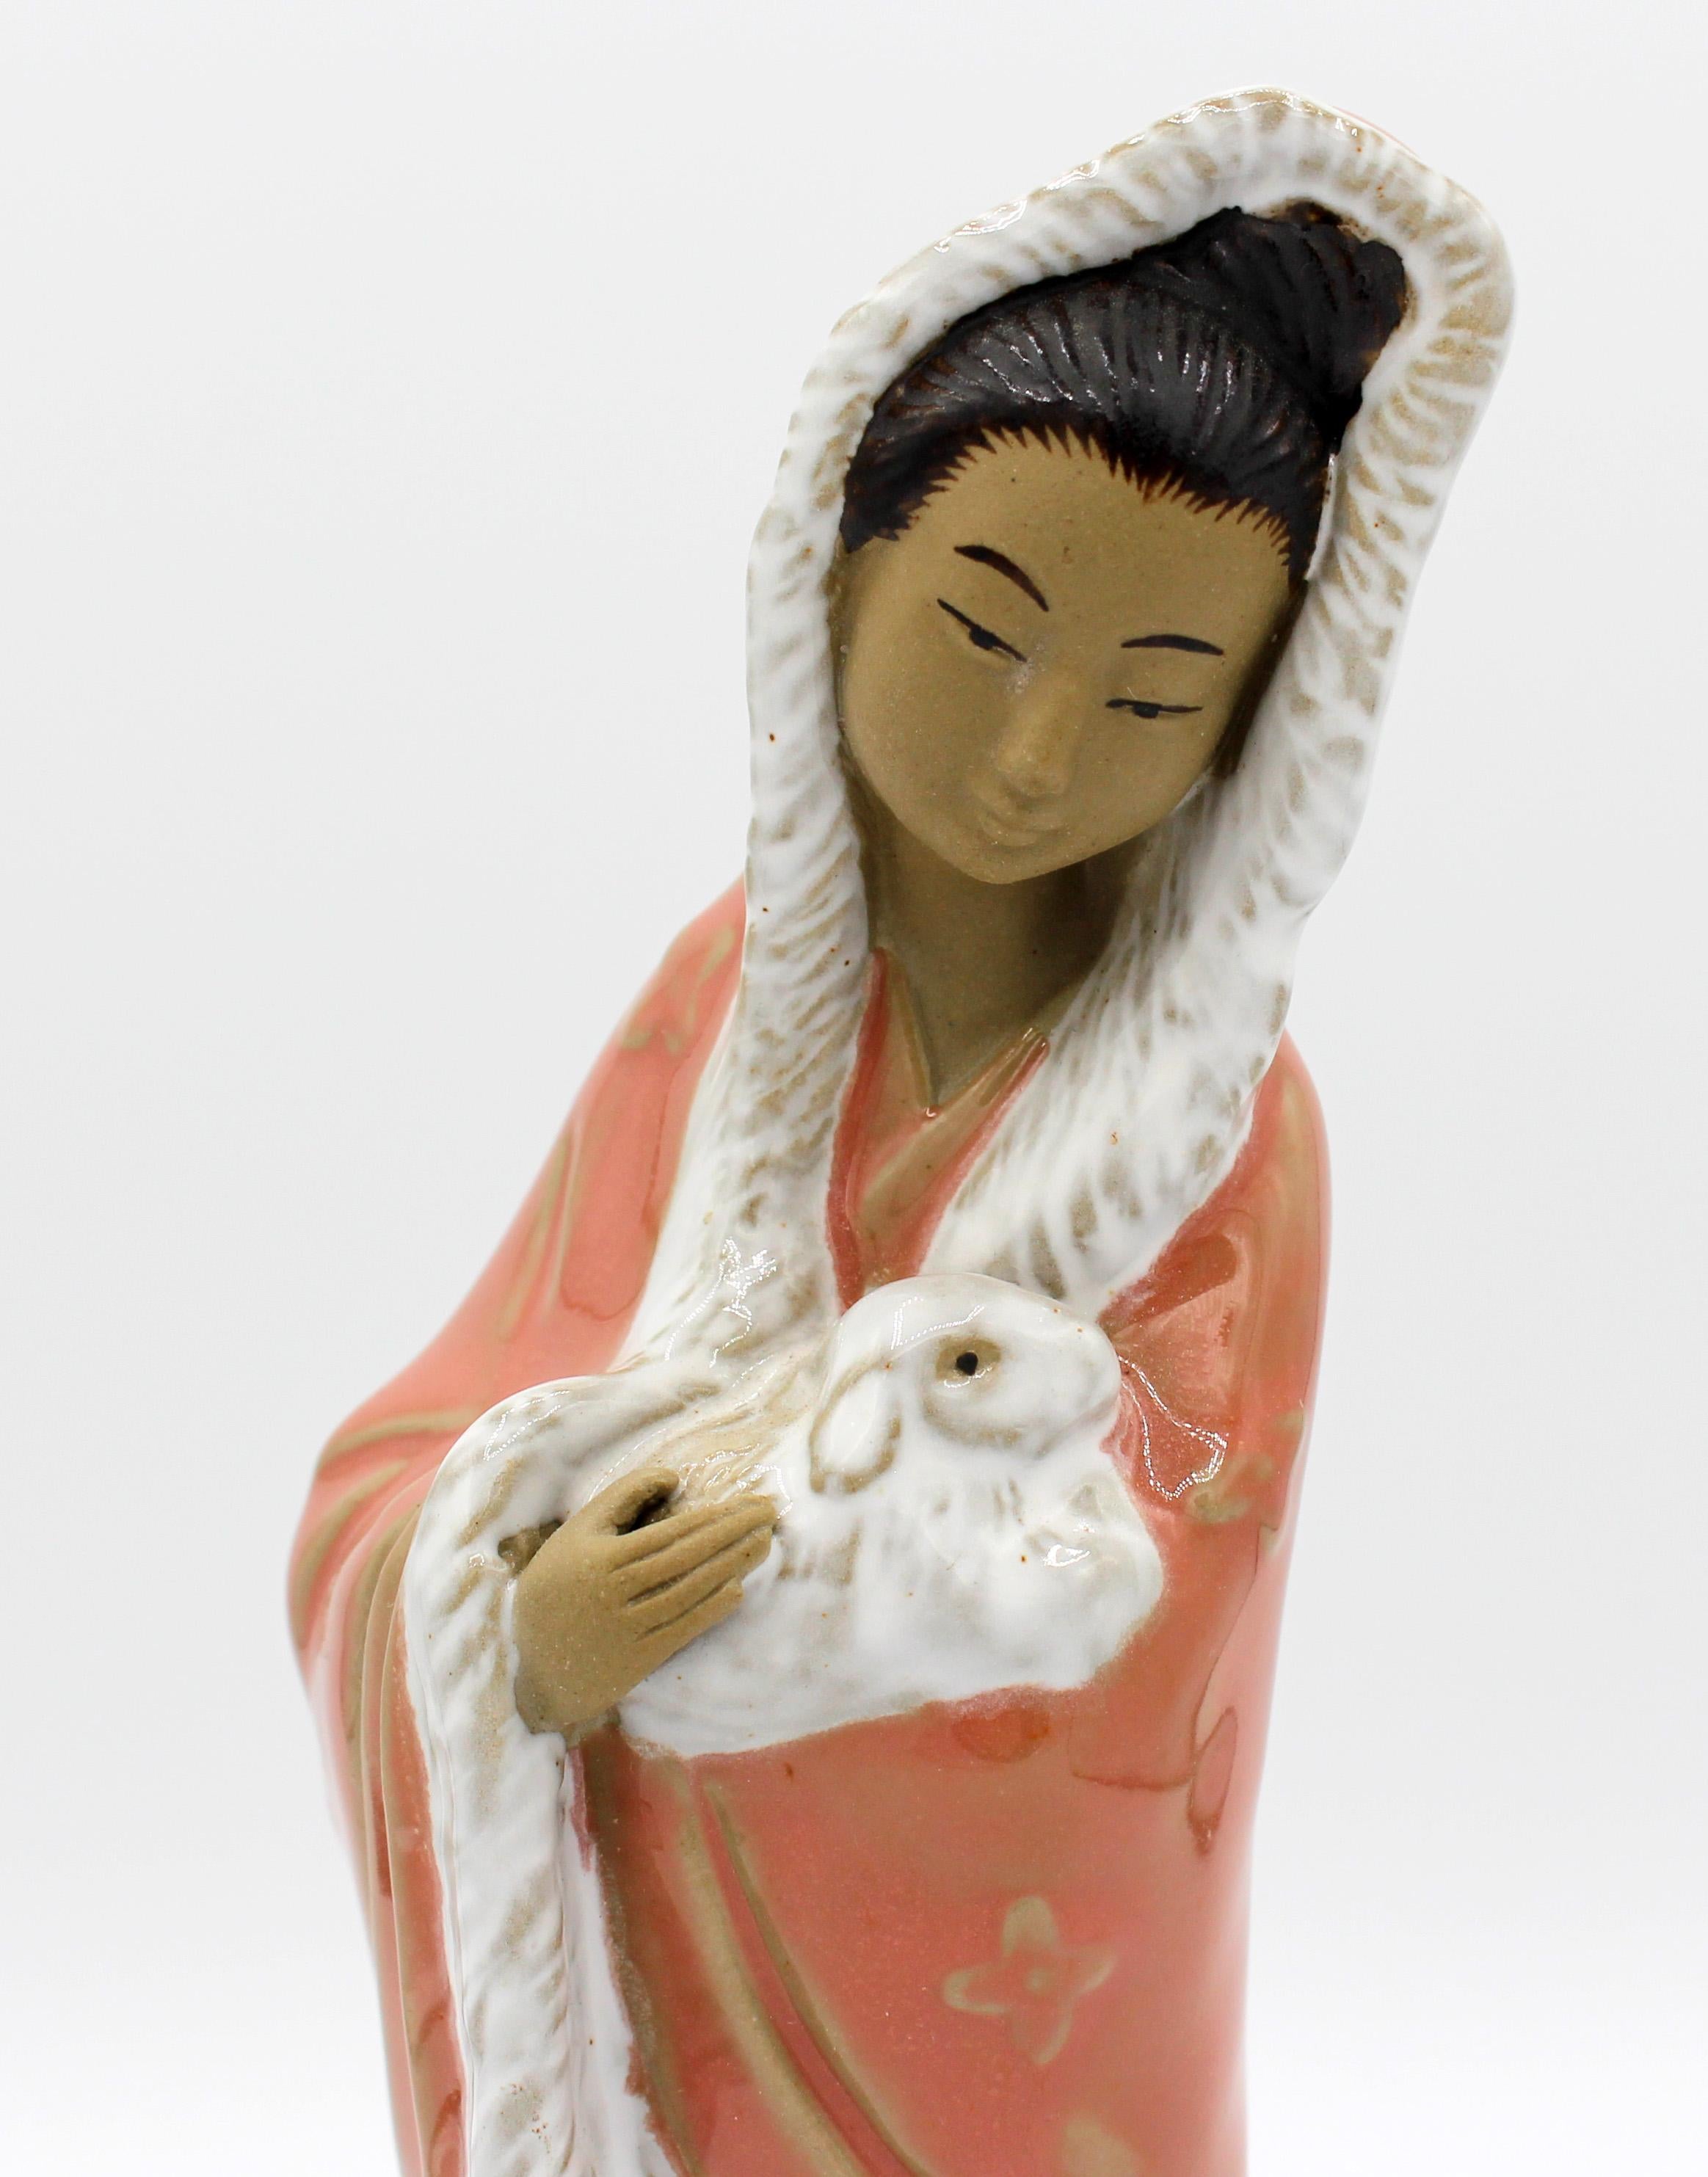 Chinese, circa 1970s, mud figure from Wanjiang, Guangong province. A lovely woman in a winter fur trimmed coat holding a rabbit with a goat at her feet. Finely detailed. 9.5